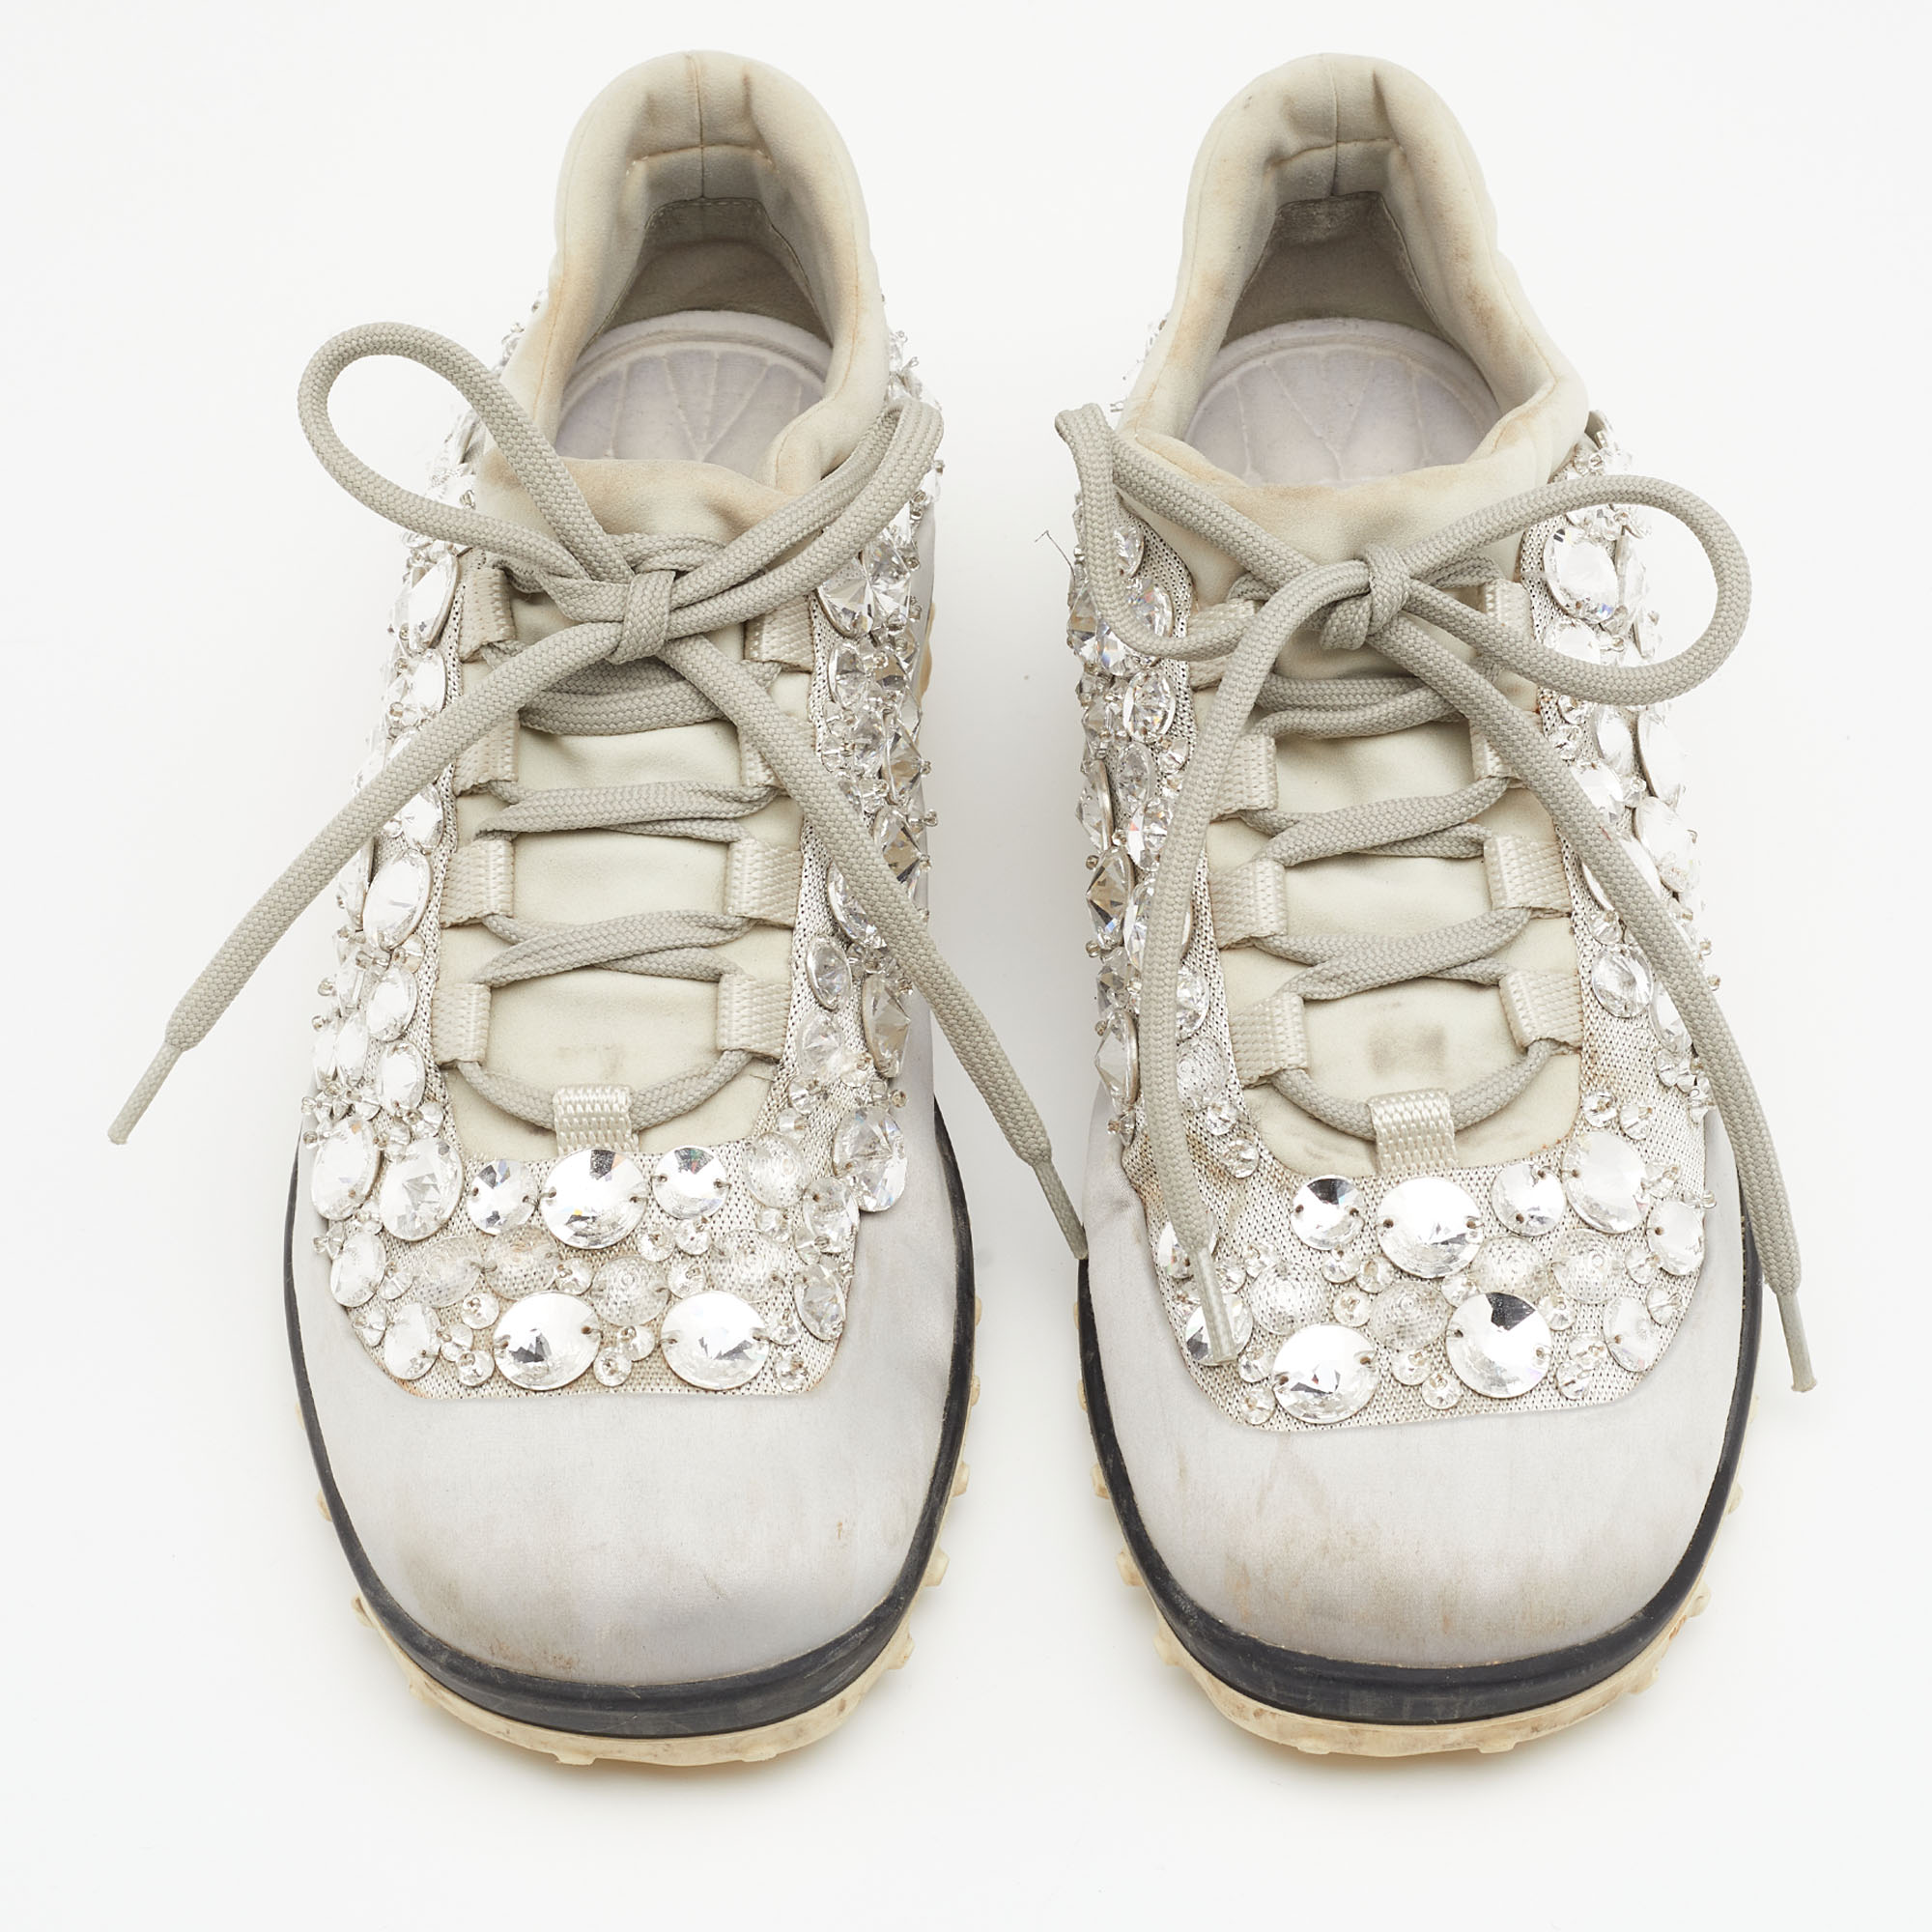 Miu Miu Grey Satin And Stretch Fabric Astro Crystal Embellished Low Top Sneakers Size 36